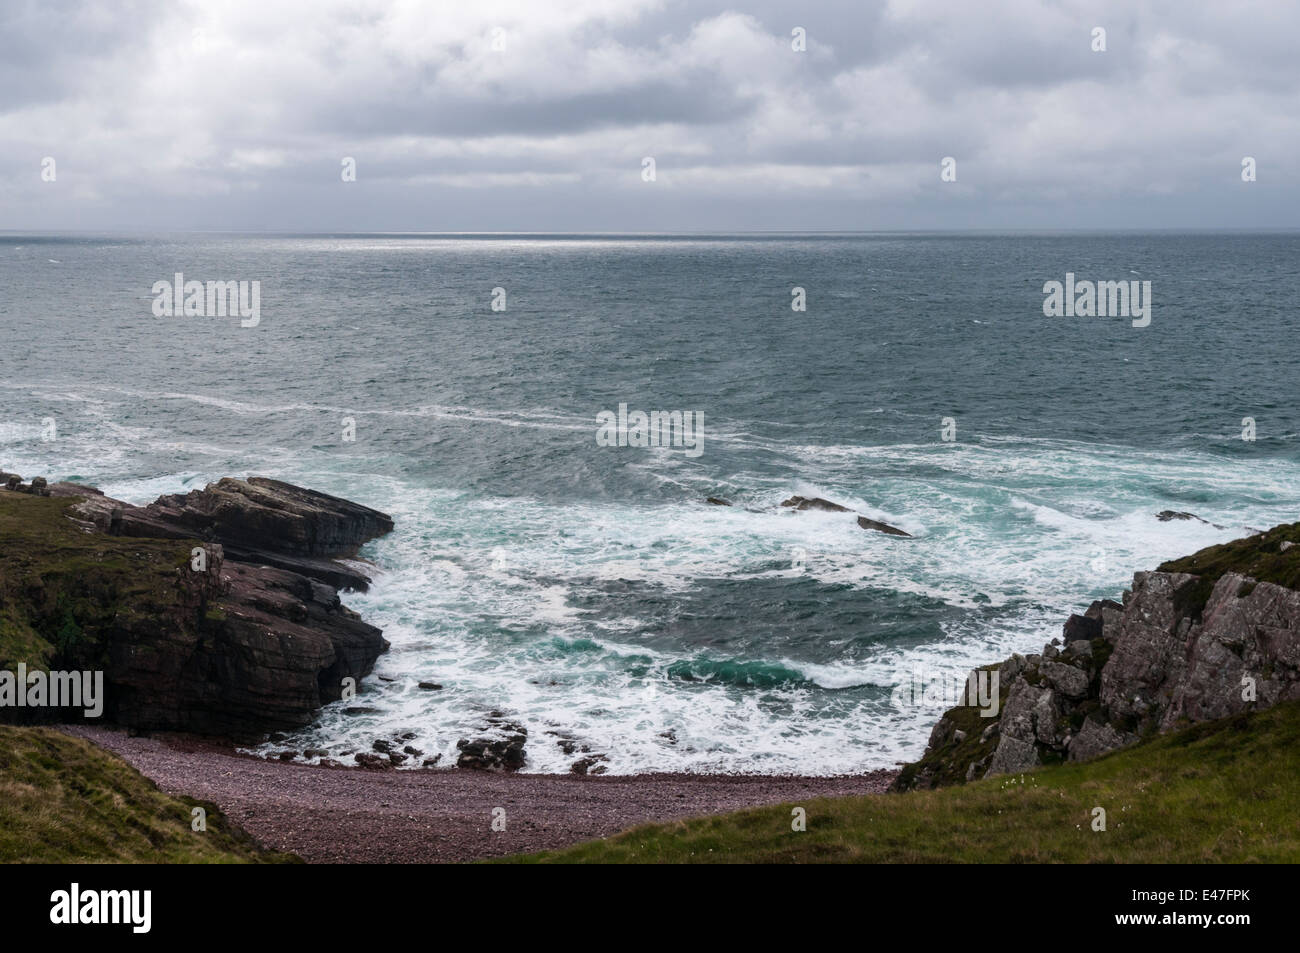 Looking out across The Minch towards the Outer Hebrides from Sron na h-Airde Fholaich on a dull, stormy day. Stock Photo